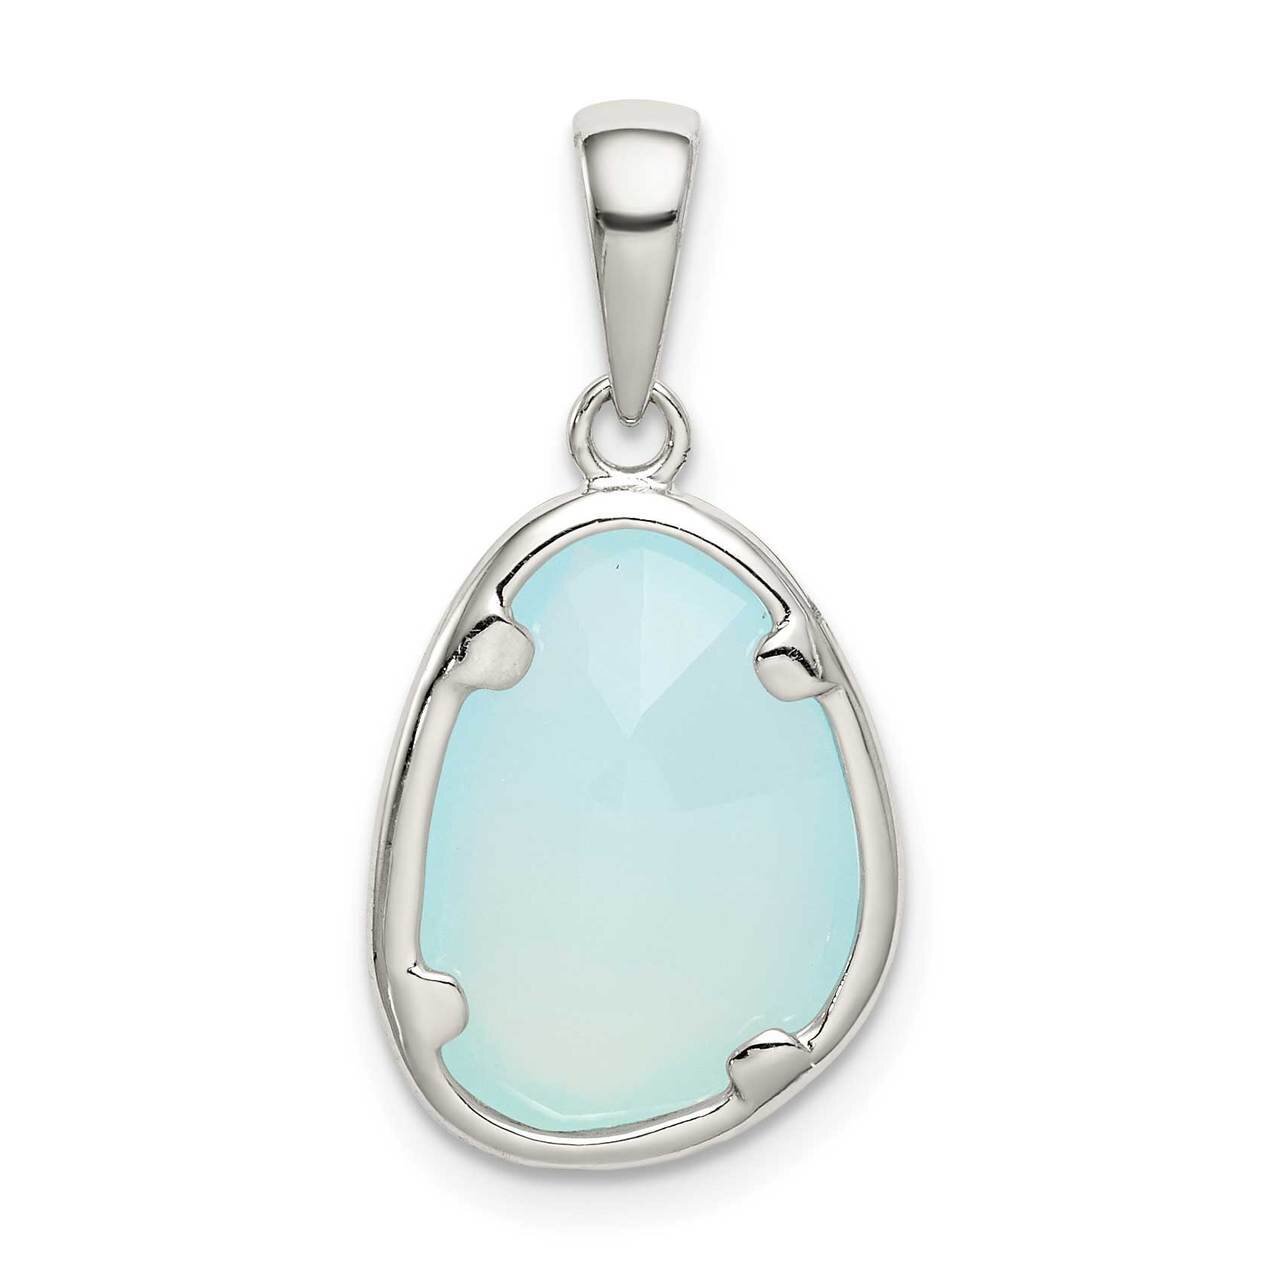 Blue Chalcedony Stone Pendant Sterling Silver QP5108